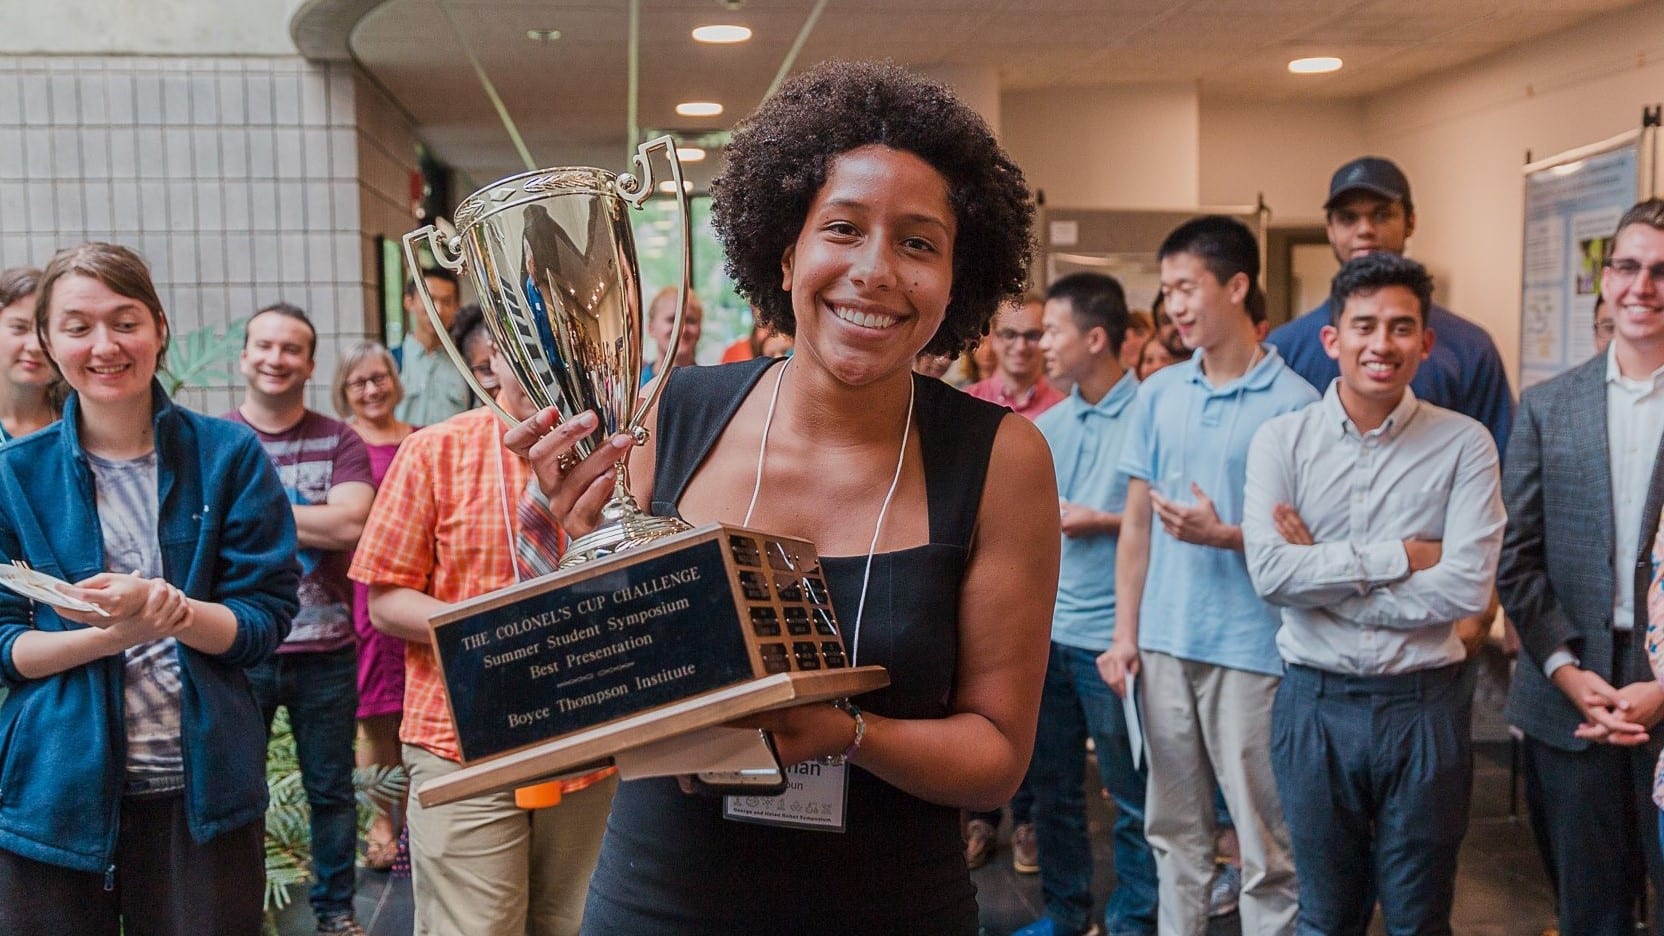 BTI intern Siobhan Calhoun holds The Colonel’s Cup Challenge trophy, awarded for winning the Best Presentation at the George and Helen Kohut Symposium on August 8, 2019. 